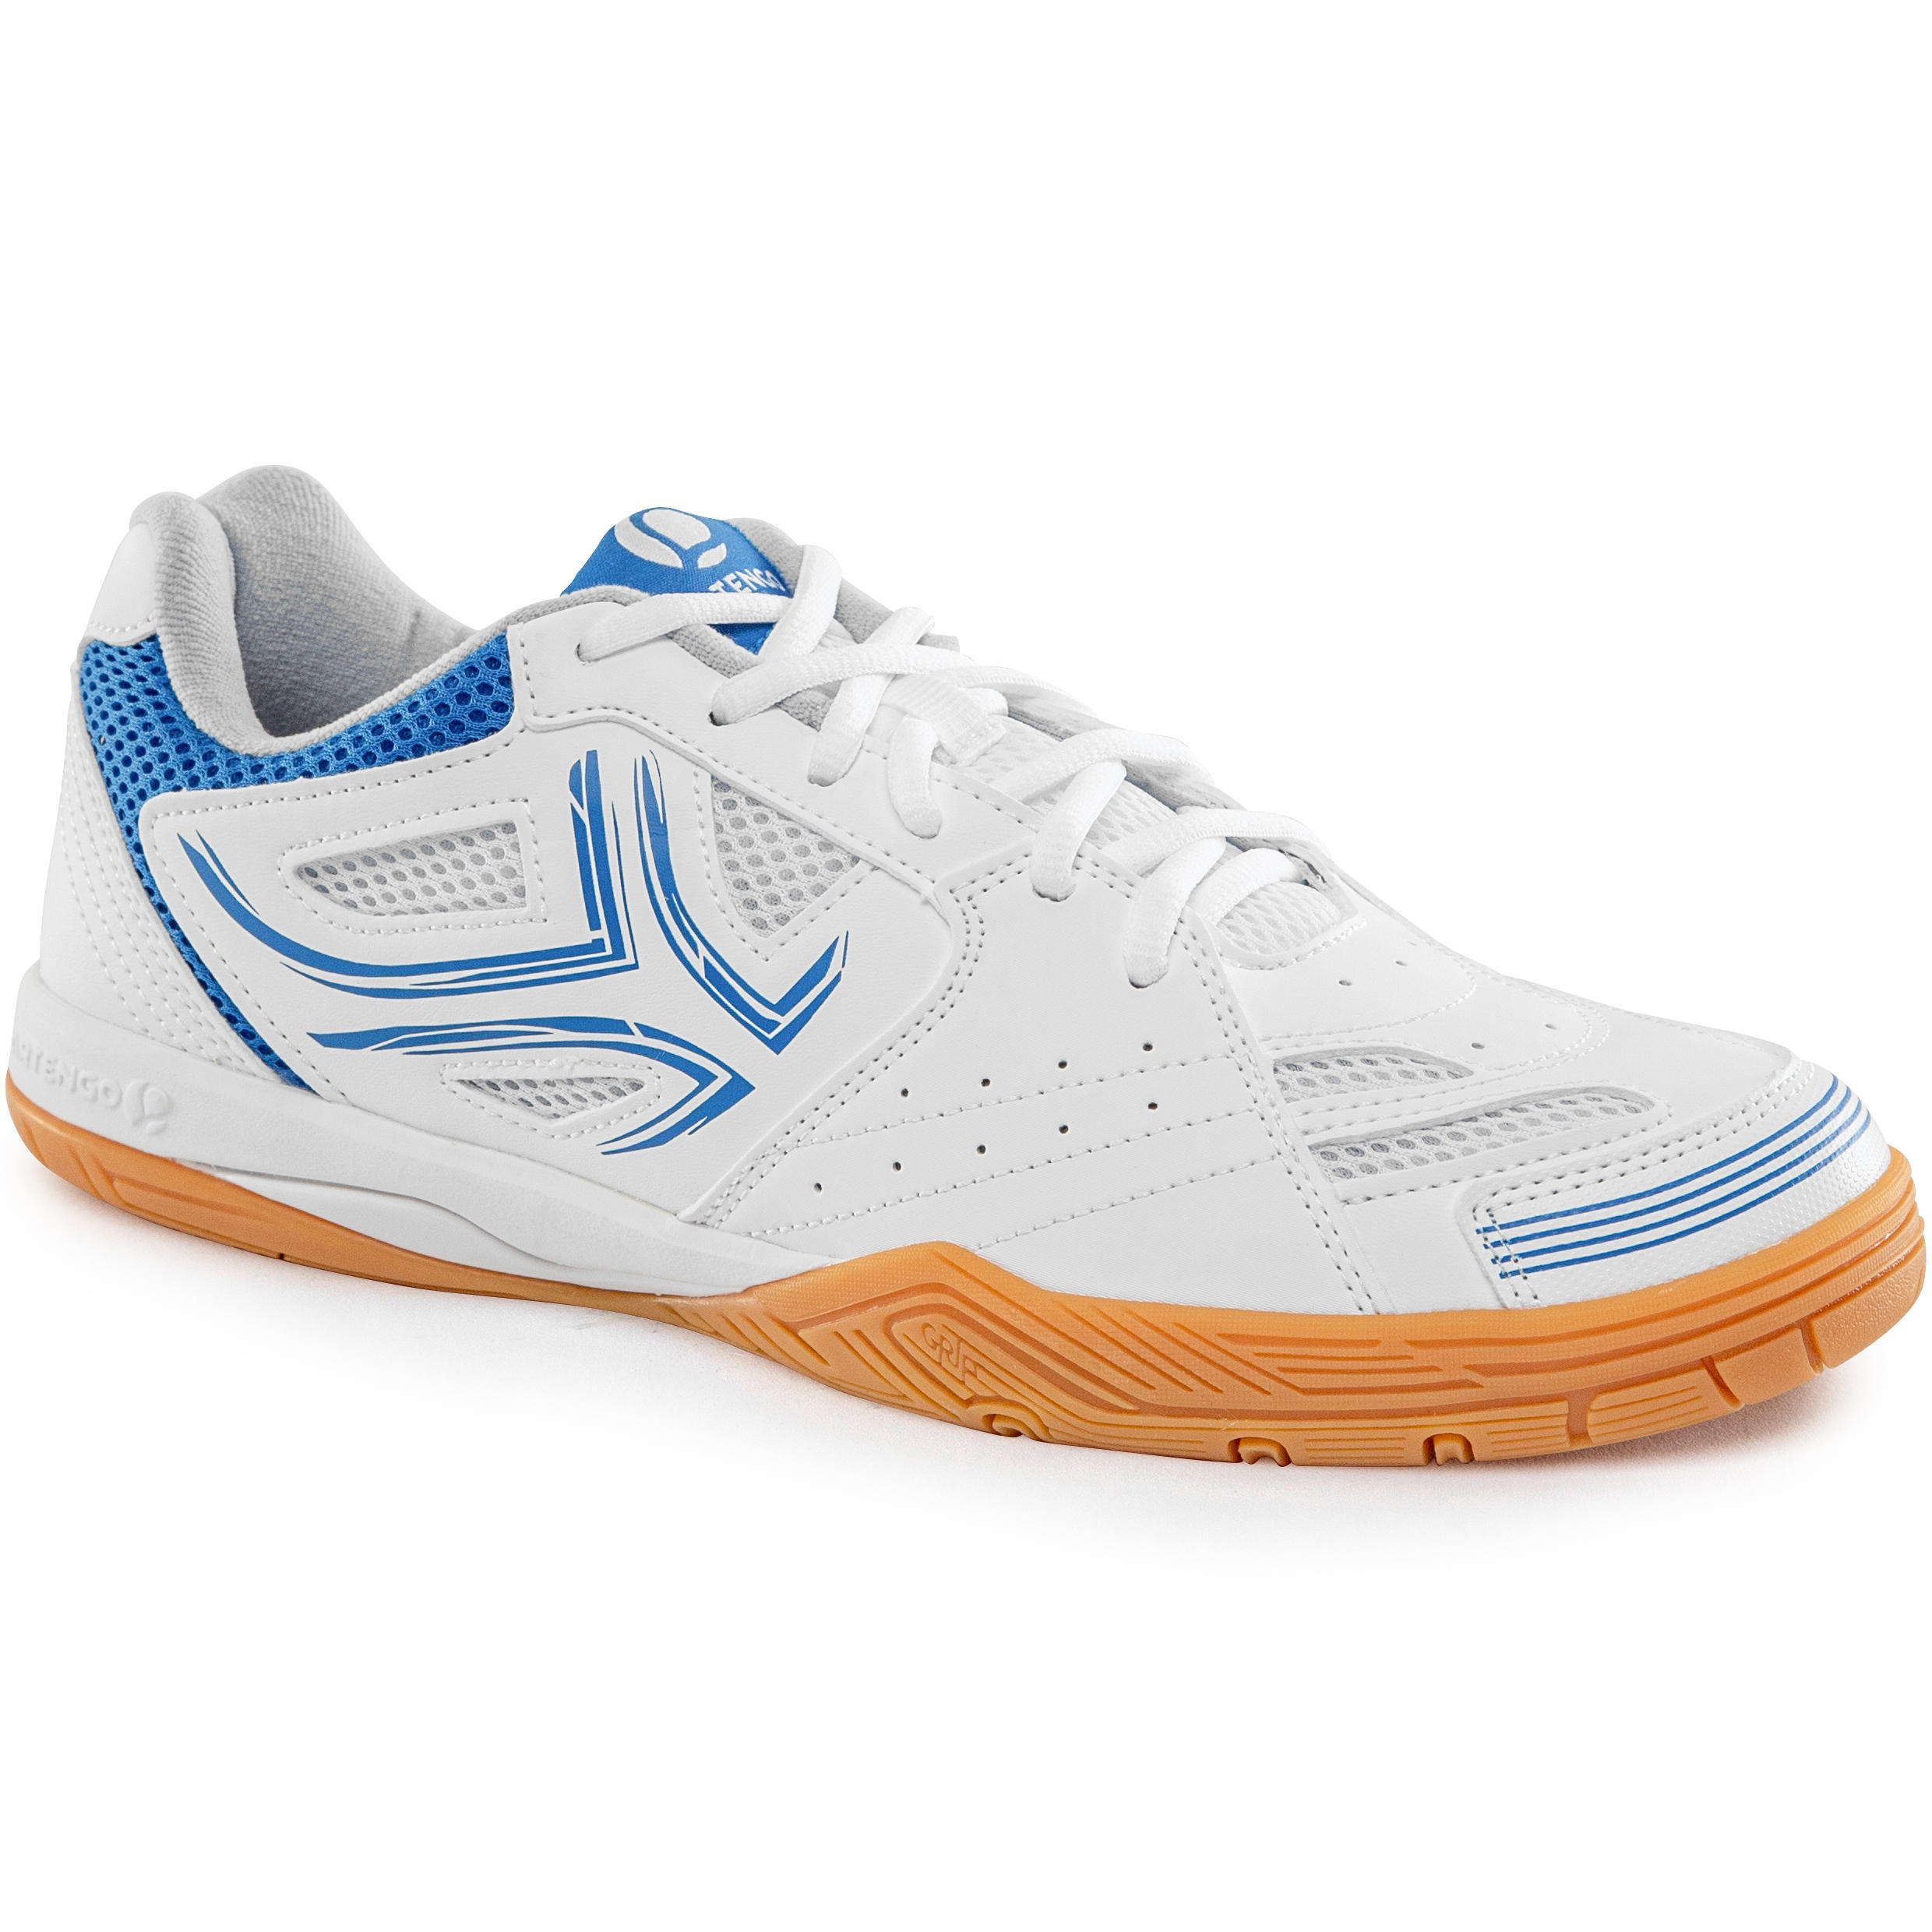 stag table tennis shoes